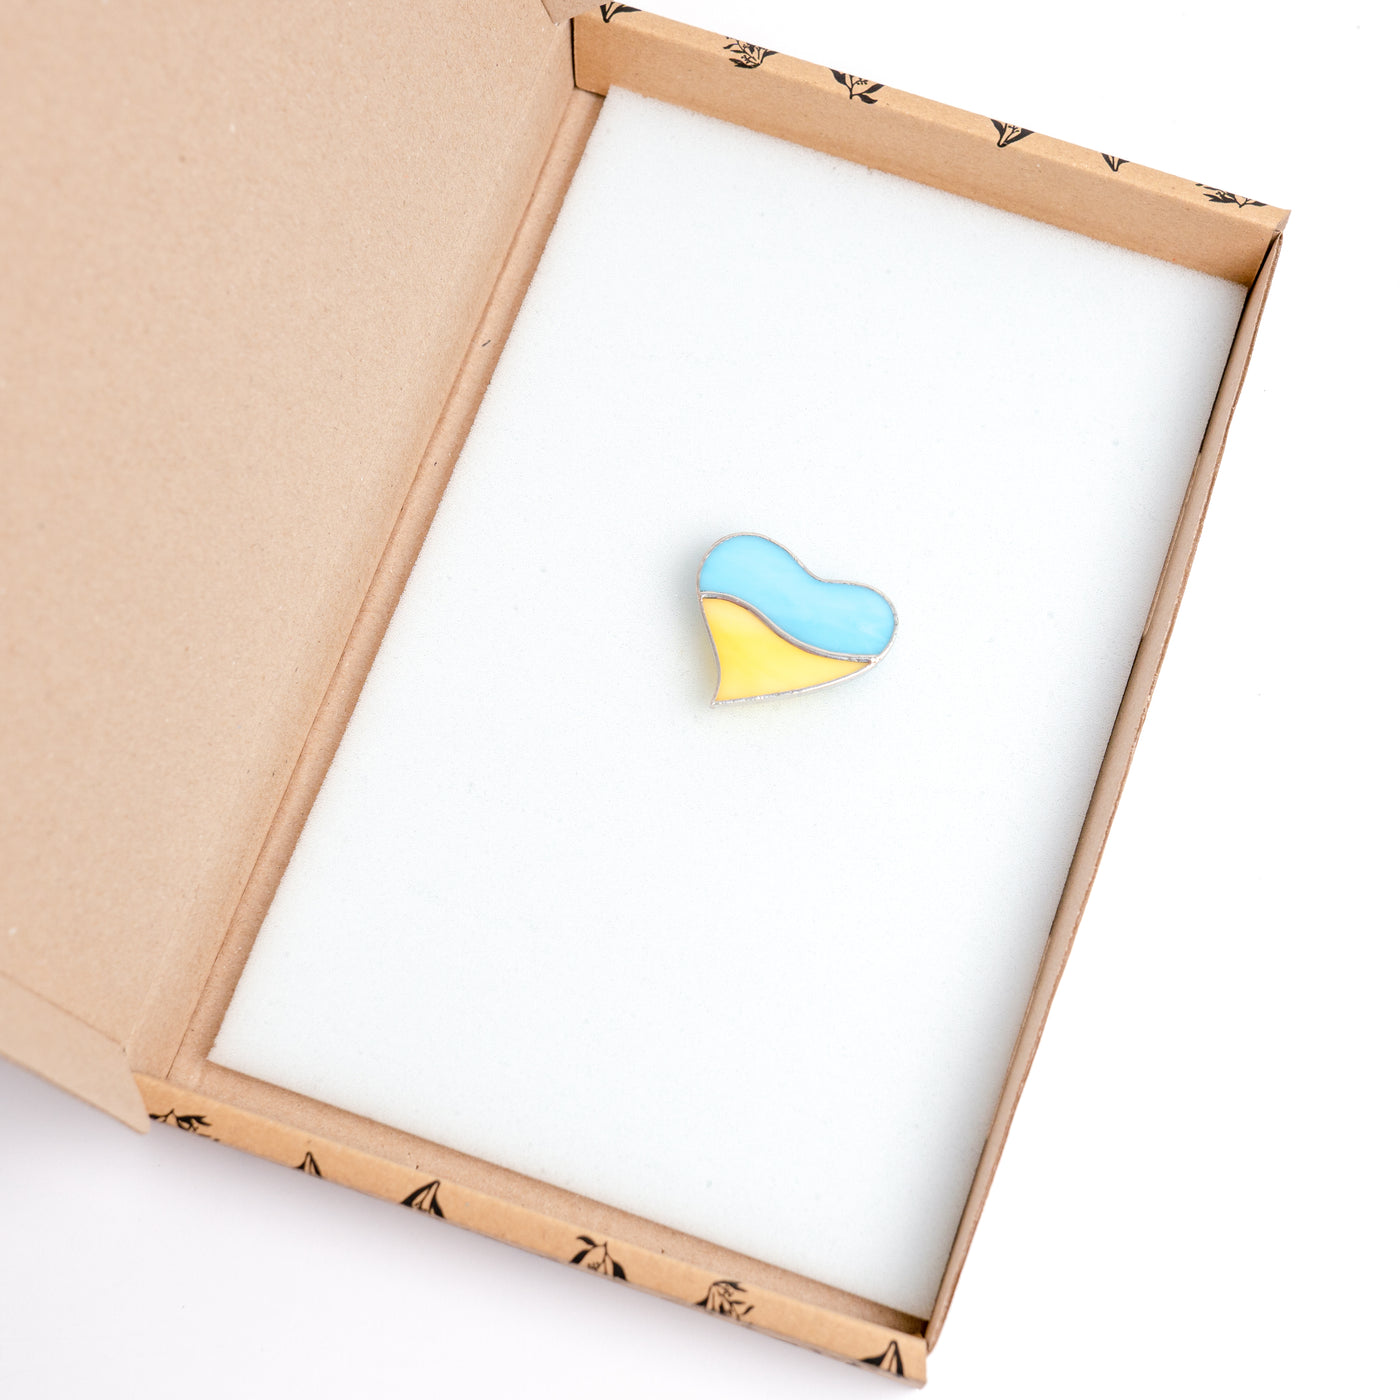 Stained glass light-blue and yellow heart pin in a brand box